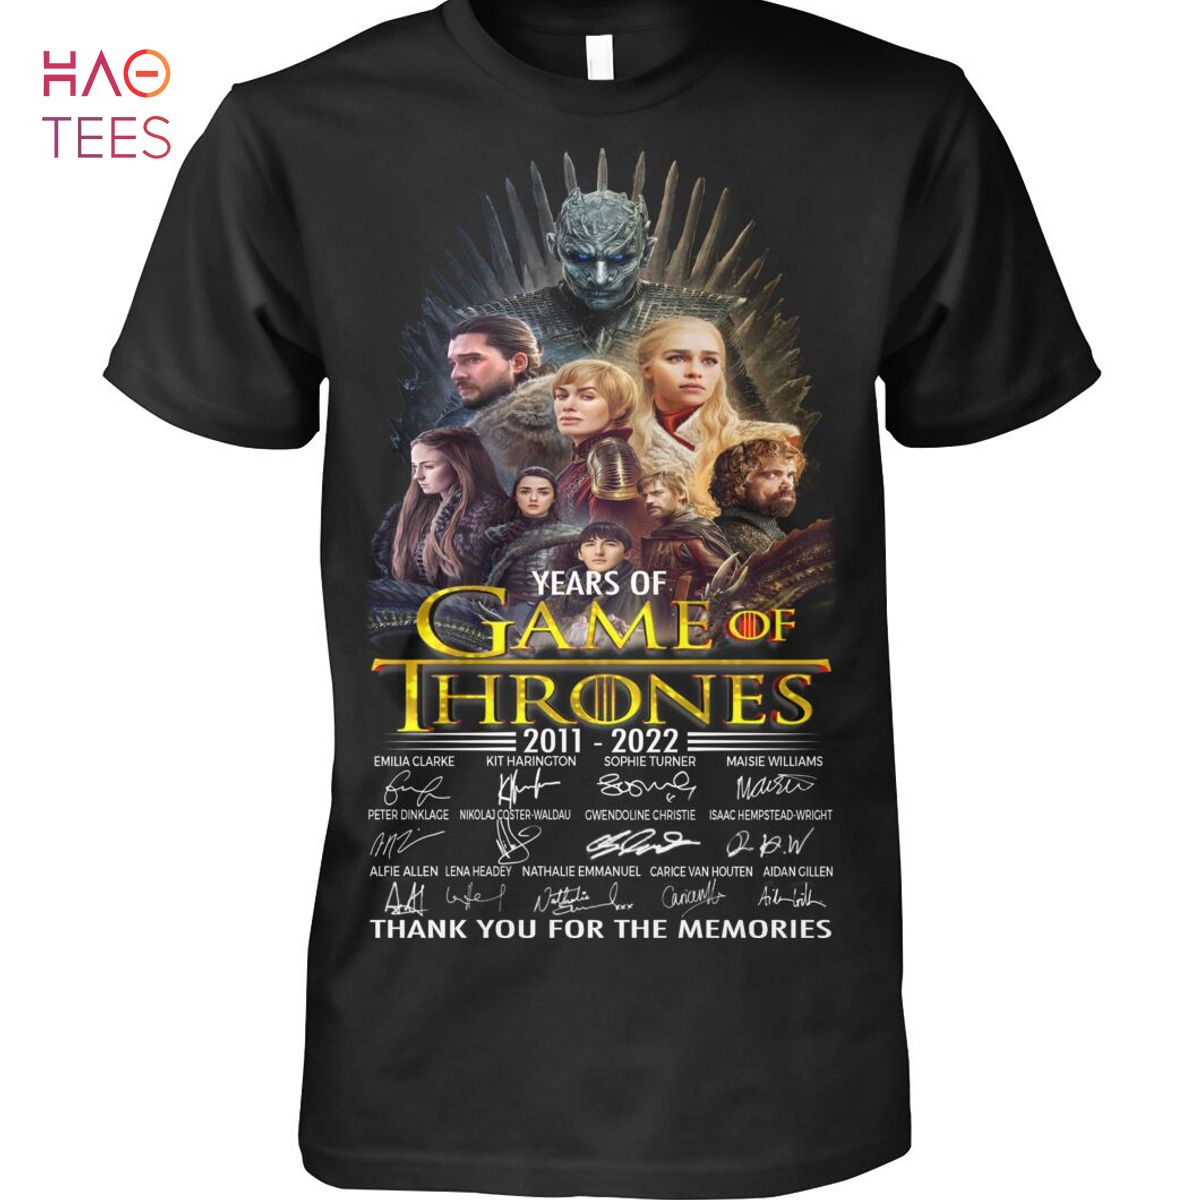 Years Of Game Of Thrones 2011-2022 Shirt